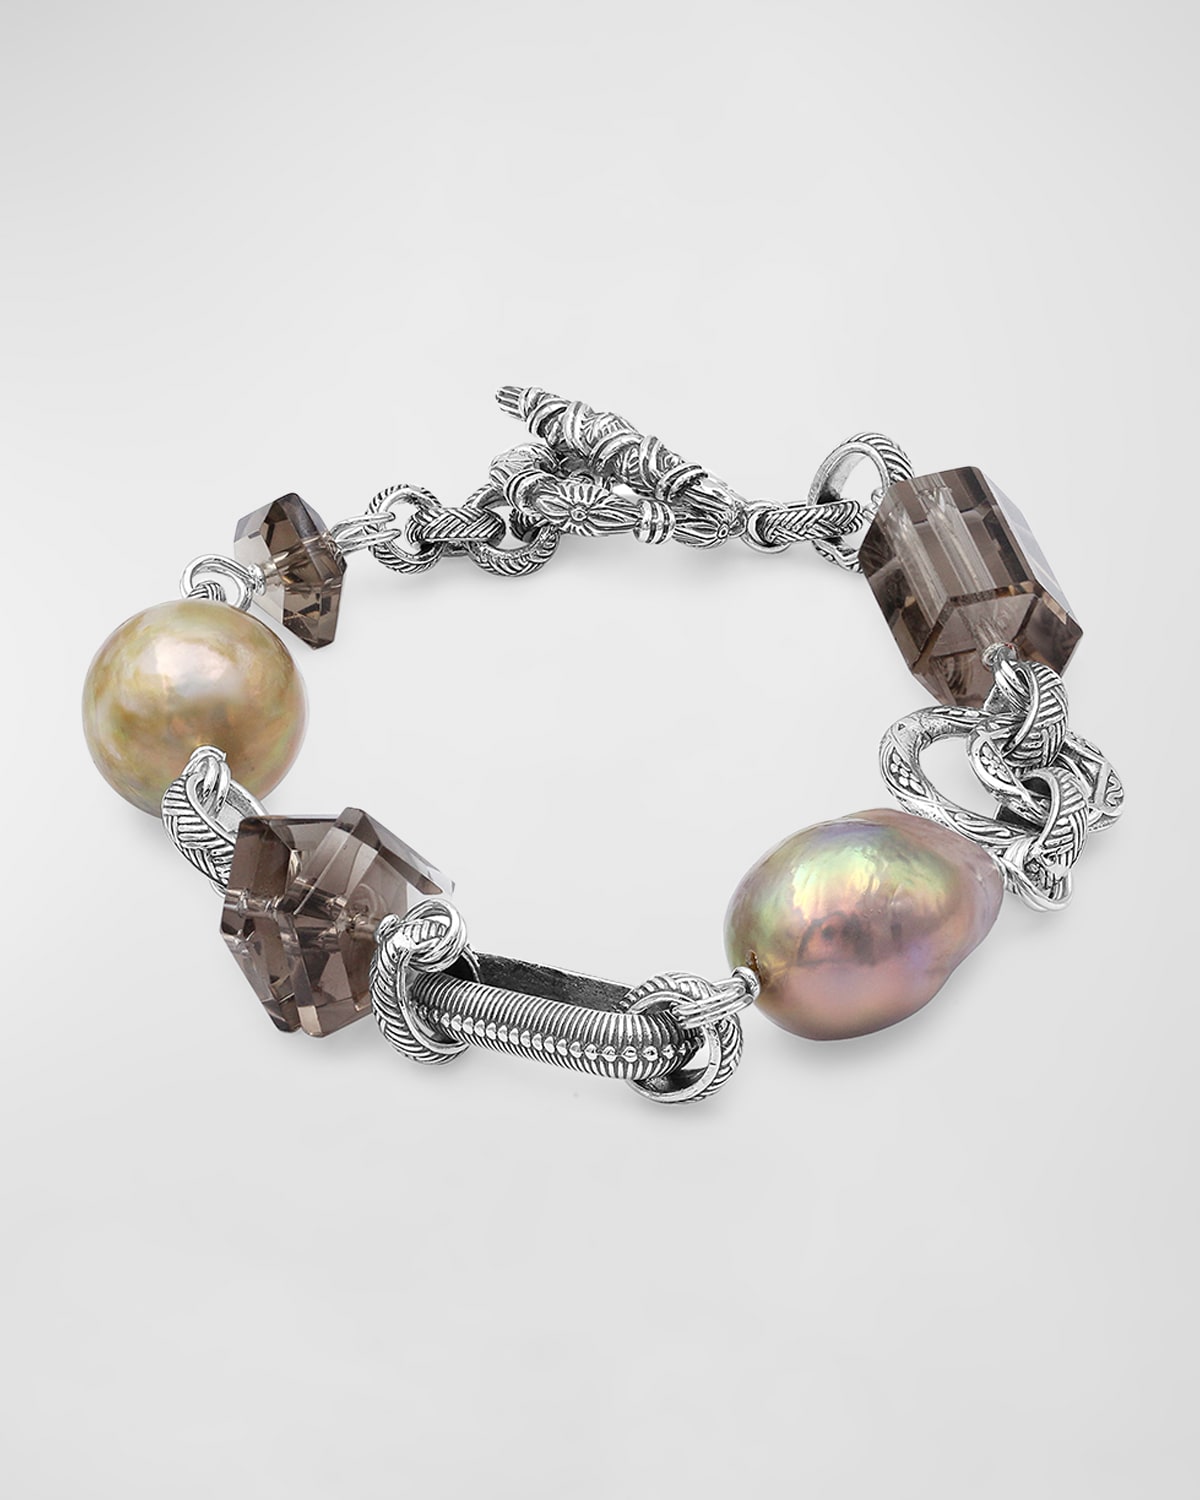 Smoky Quartz and Baroque Pearl Bracelet in Sterling Silver